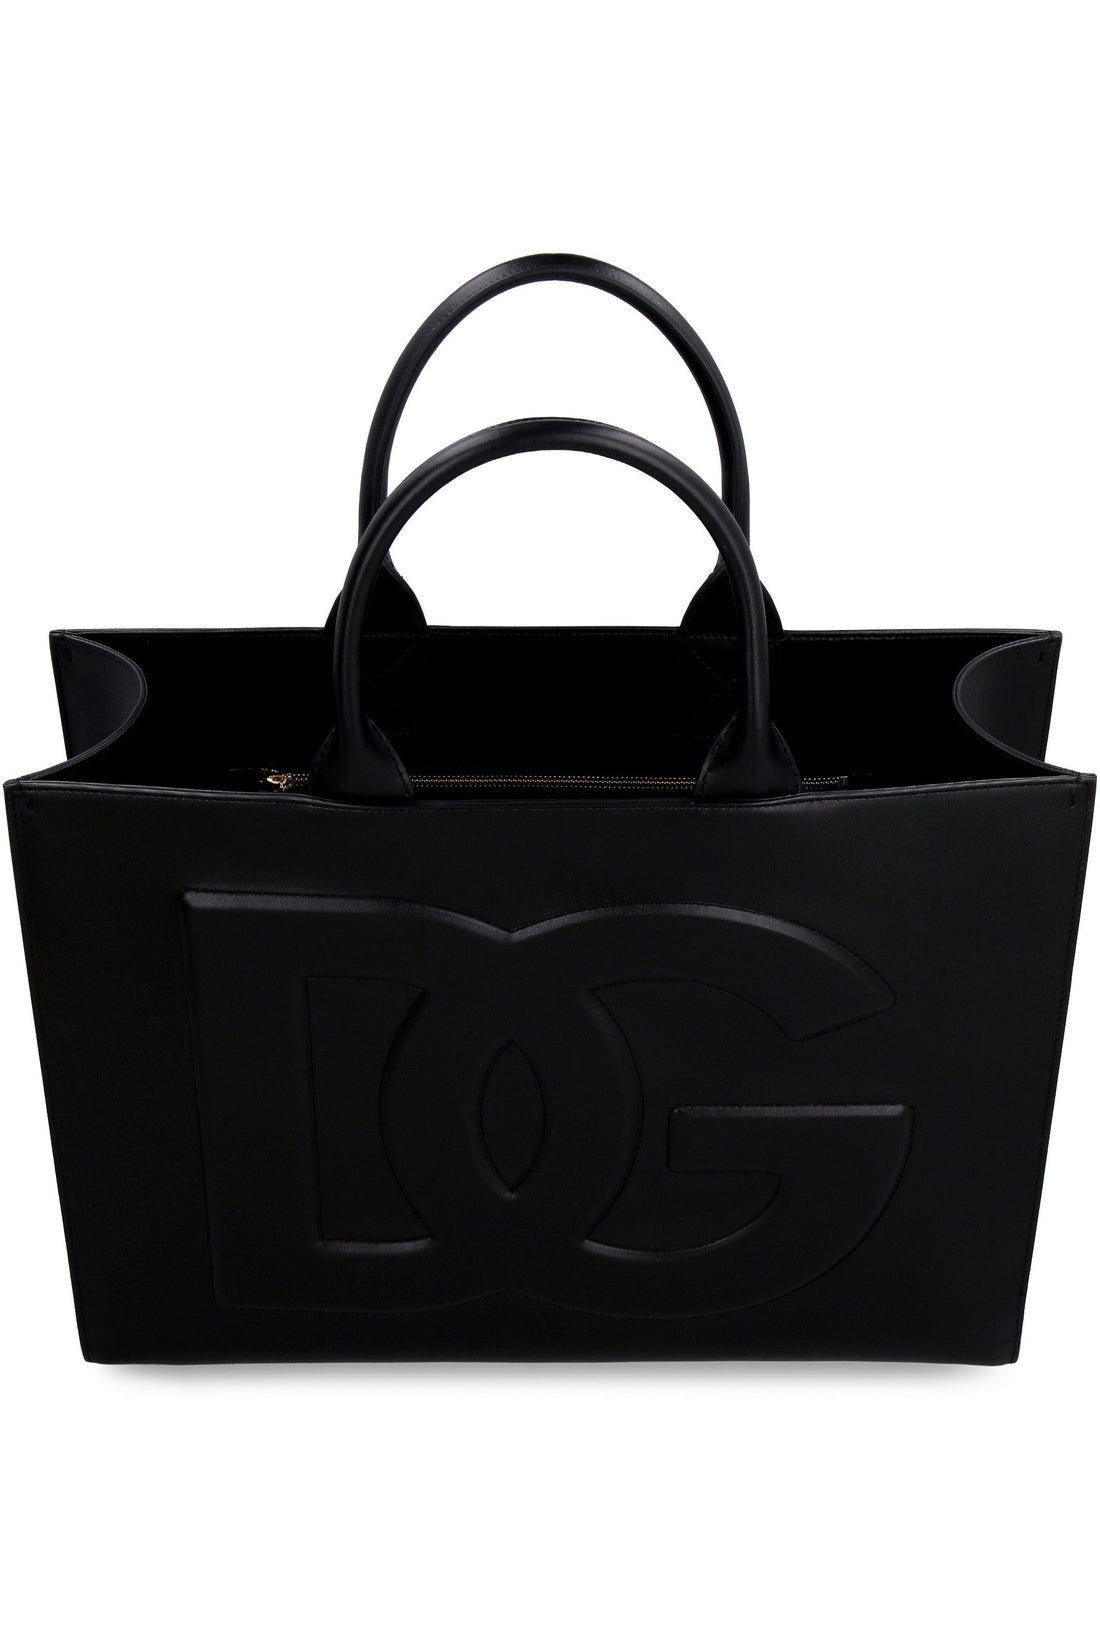 Dolce & Gabbana-OUTLET-SALE-DG Daily leather tote-ARCHIVIST